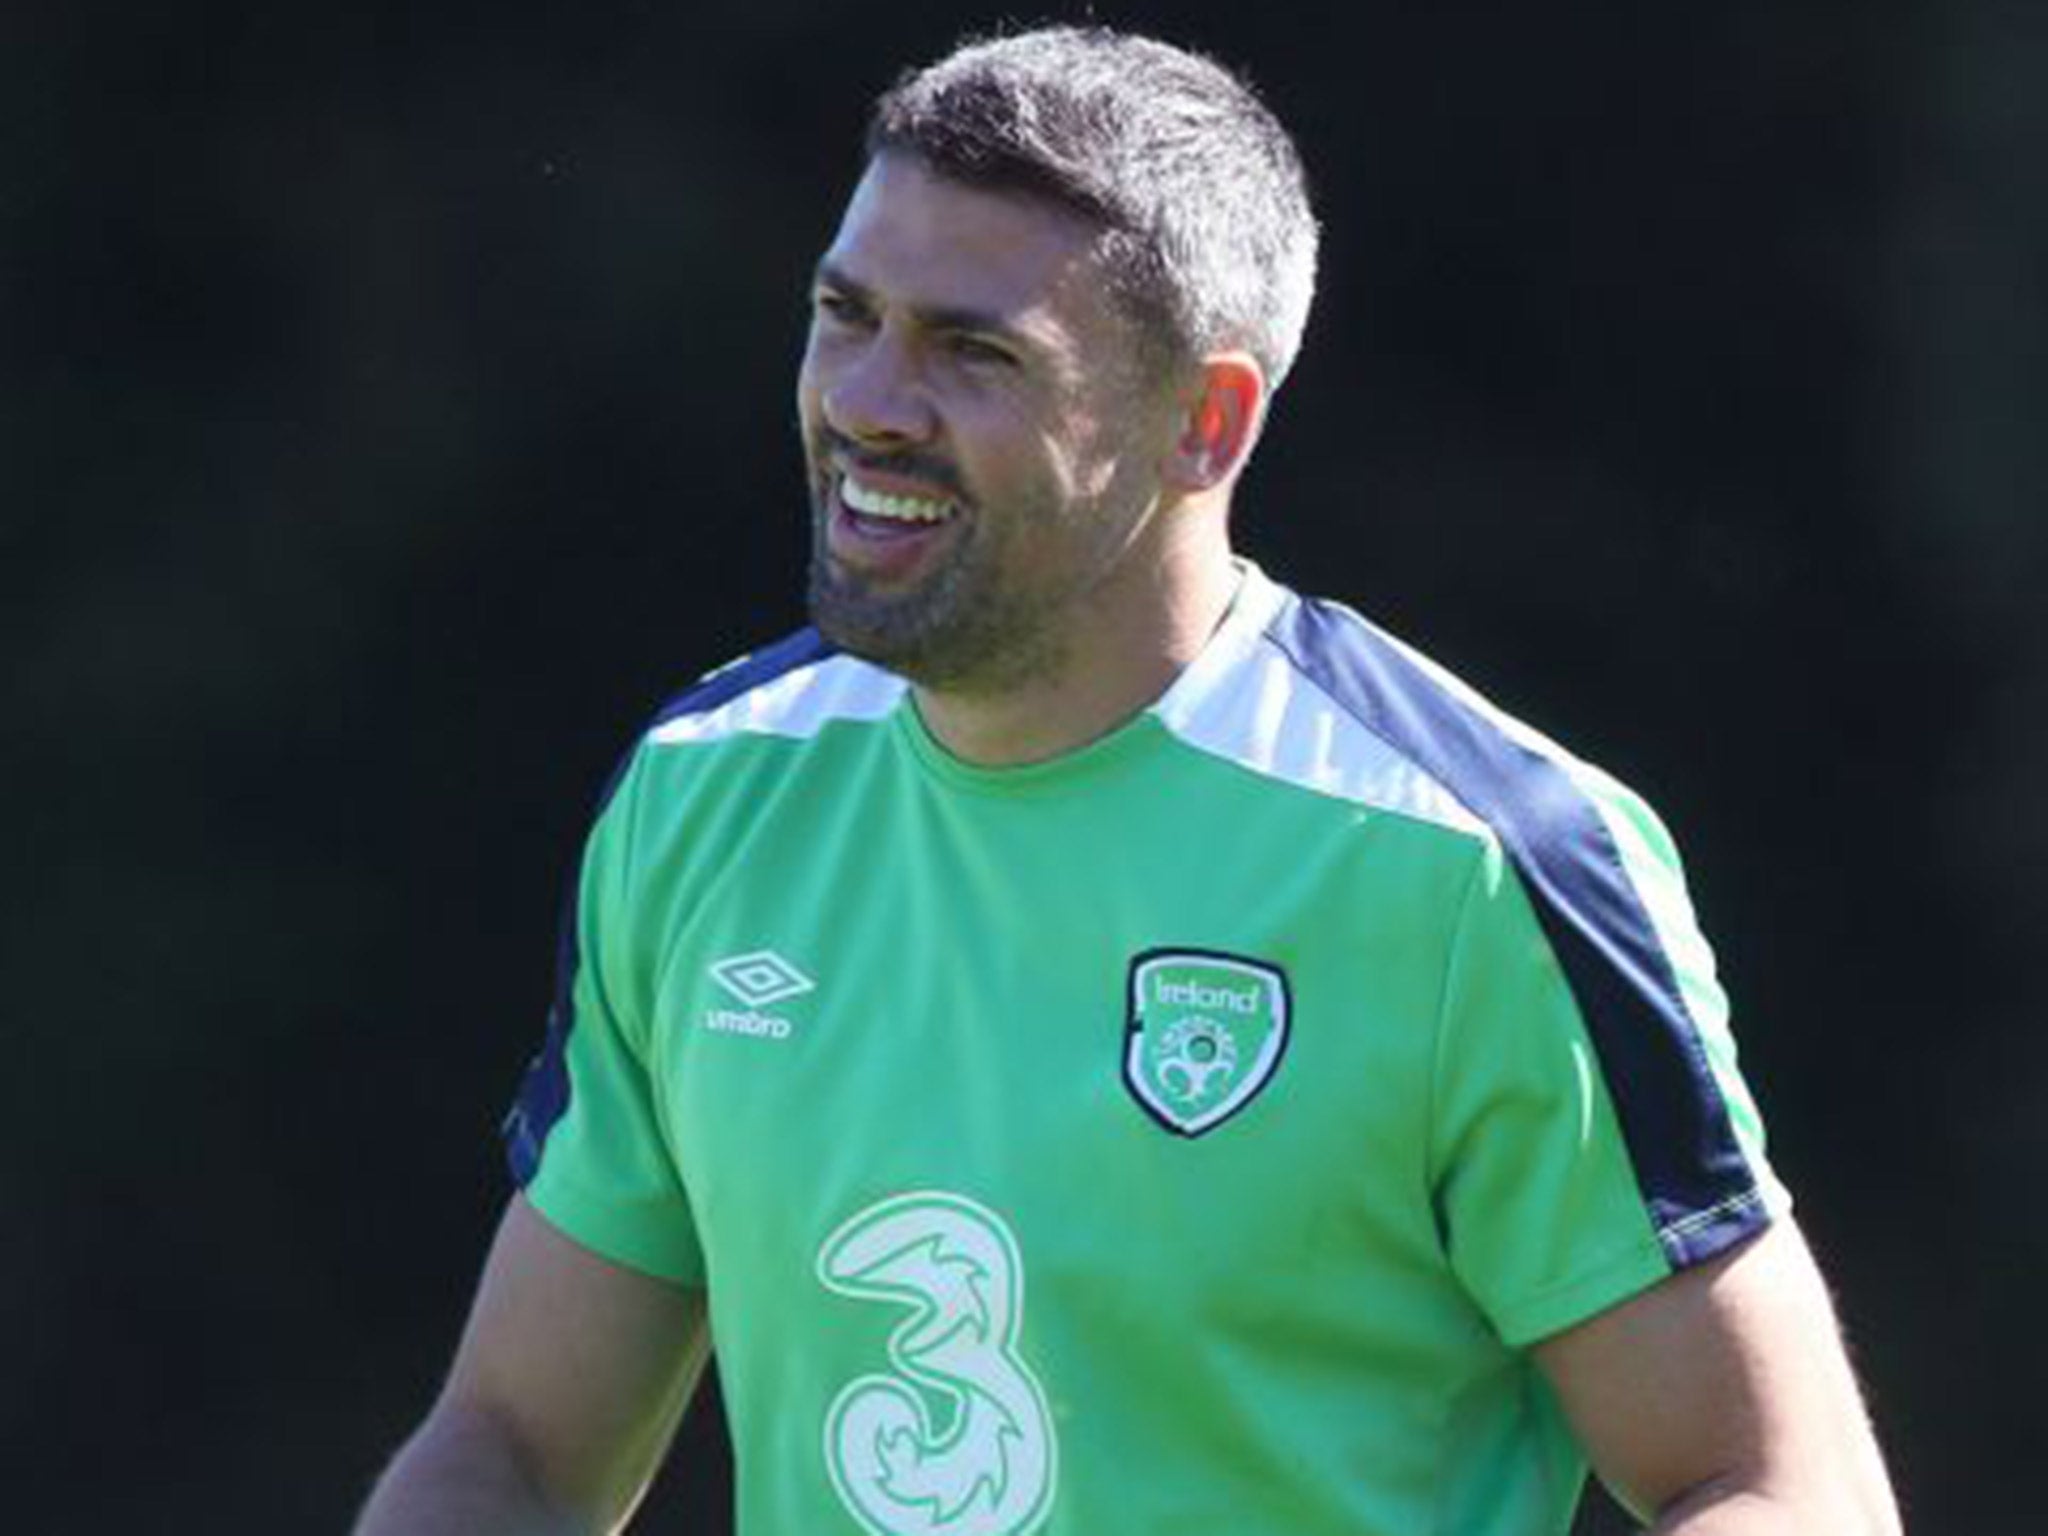 Jonathan Walters is an injury concern for the Republic of Ireland after missing training